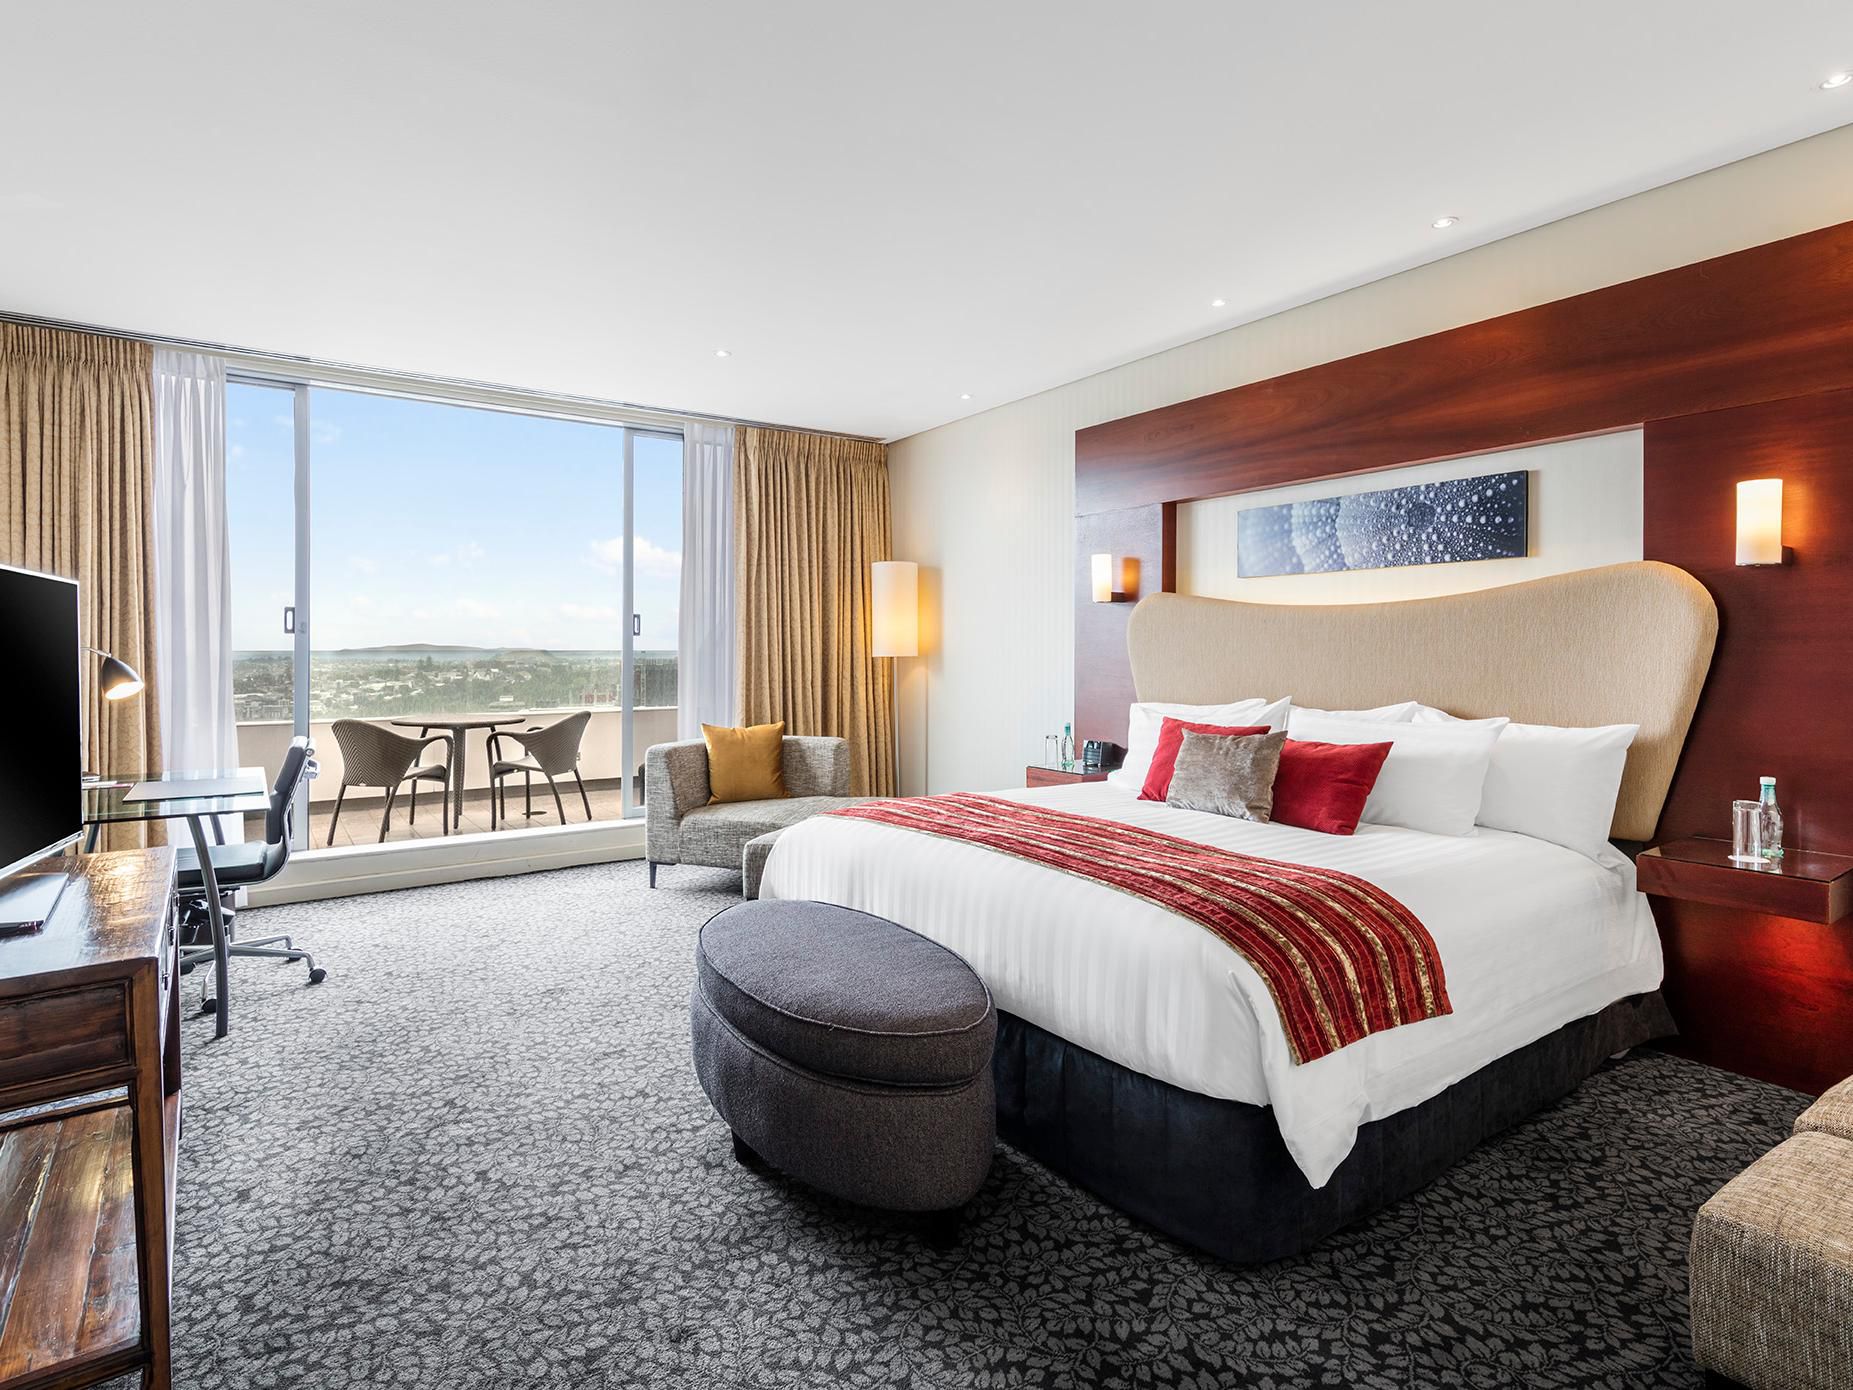 1 King Premium room with balcony located on our top floor level 28